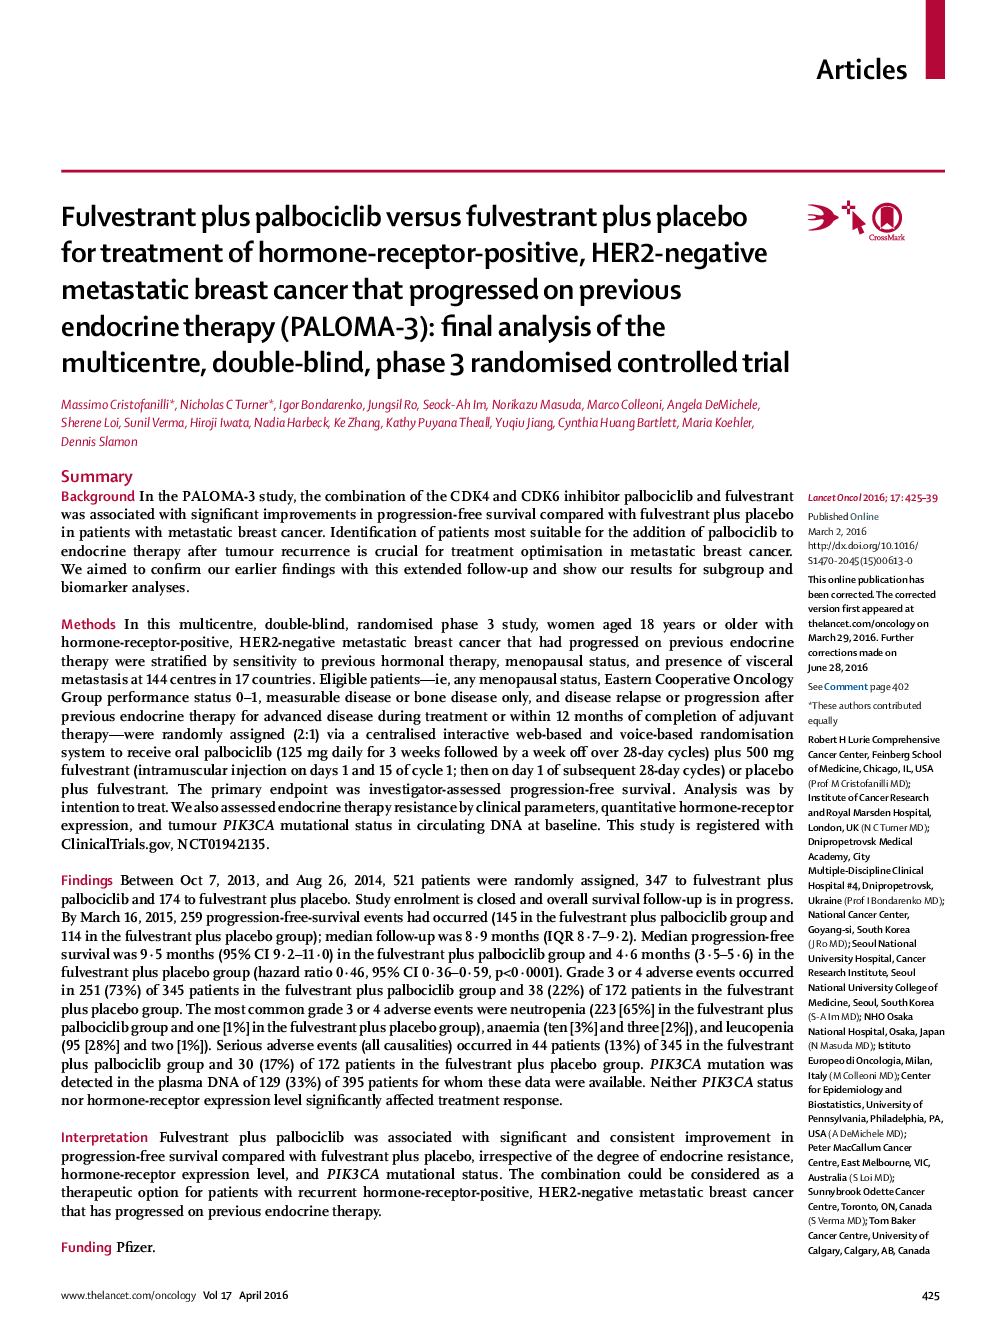 Fulvestrant plus palbociclib versus fulvestrant plus placebo for treatment of hormone-receptor-positive, HER2-negative metastatic breast cancer that progressed on previous endocrine therapy (PALOMA-3): final analysis of the multicentre, double-blind, phas